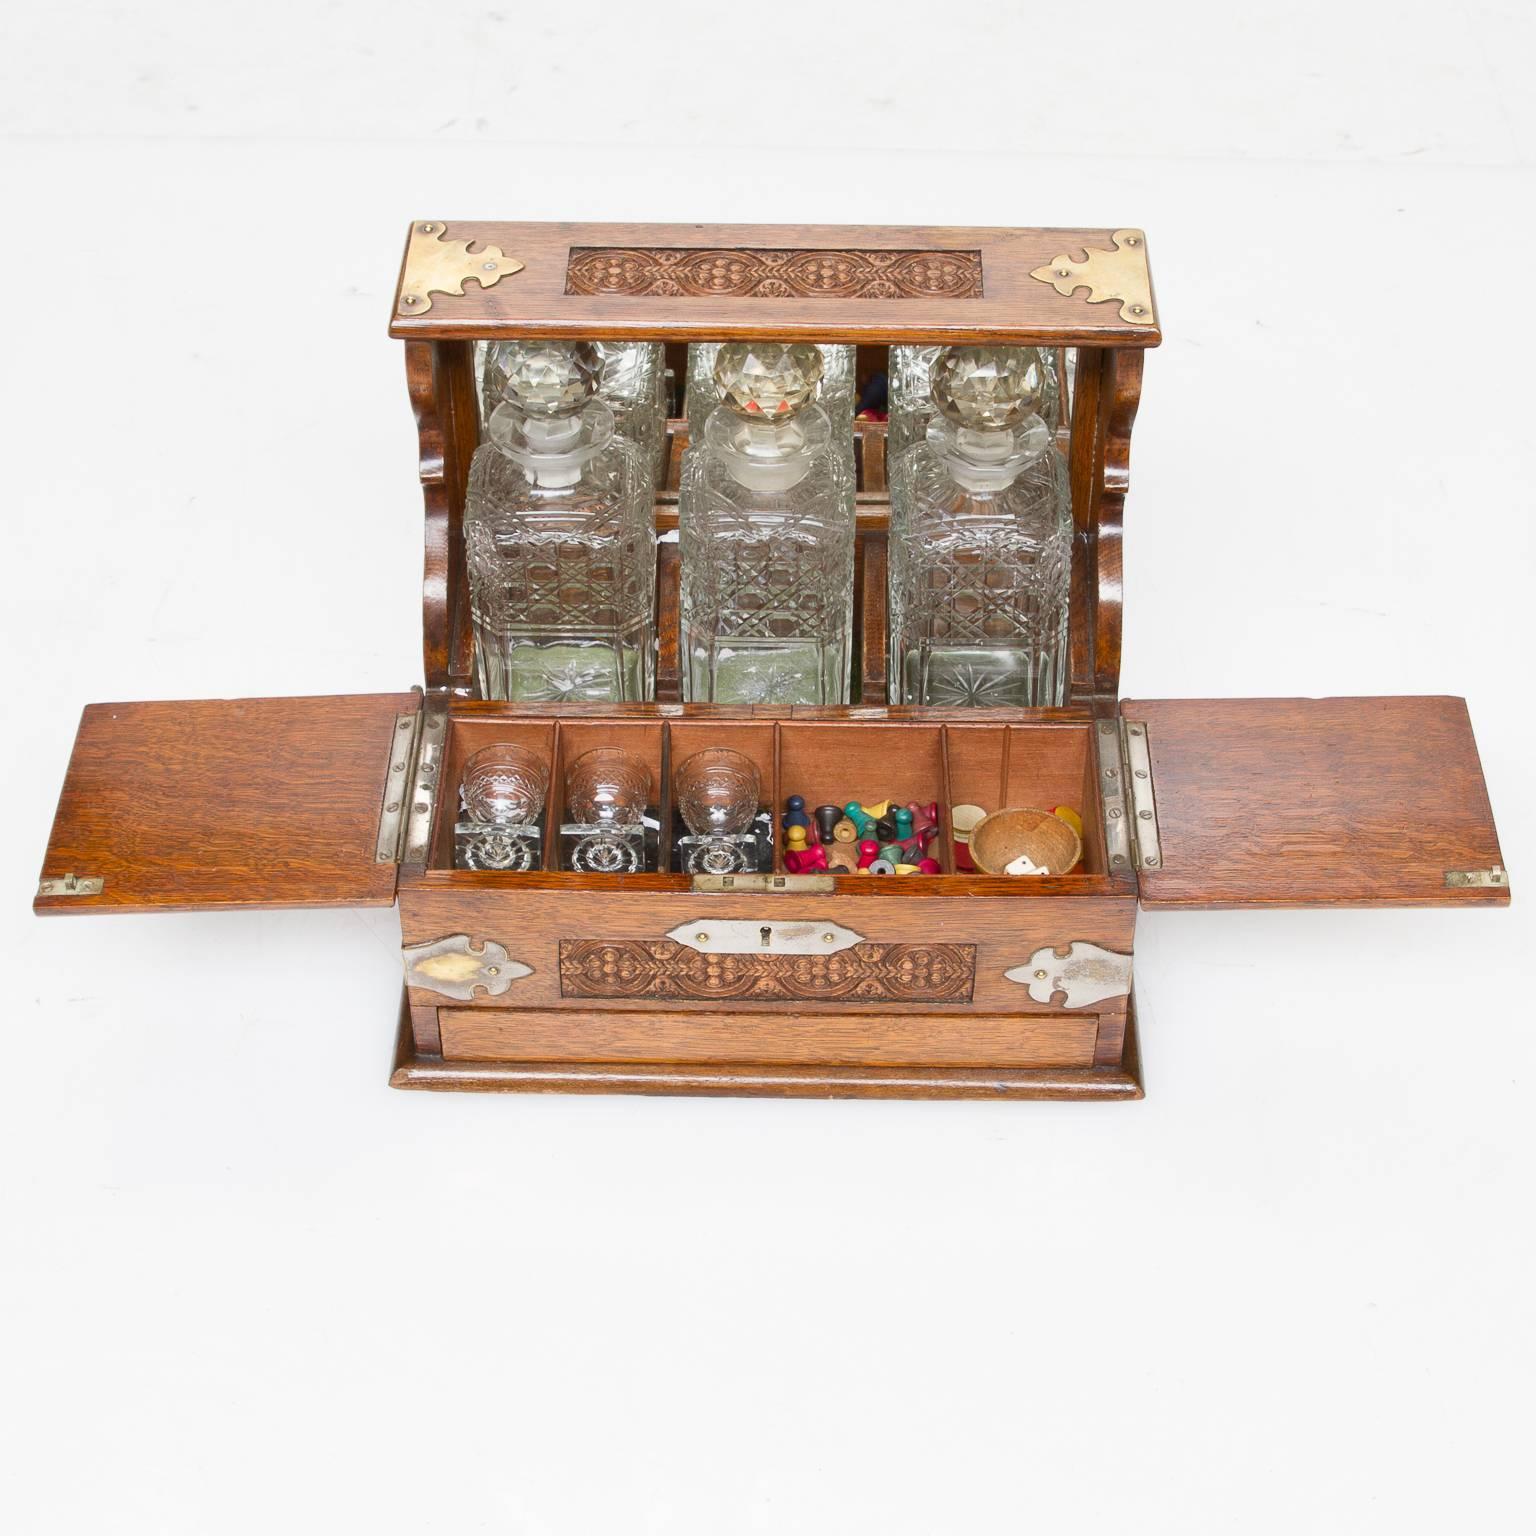 A very nice quality English oak carved decanter set and case fitted interior with a release button revealing a card drawer. Very well carved and handsome brass mounts.